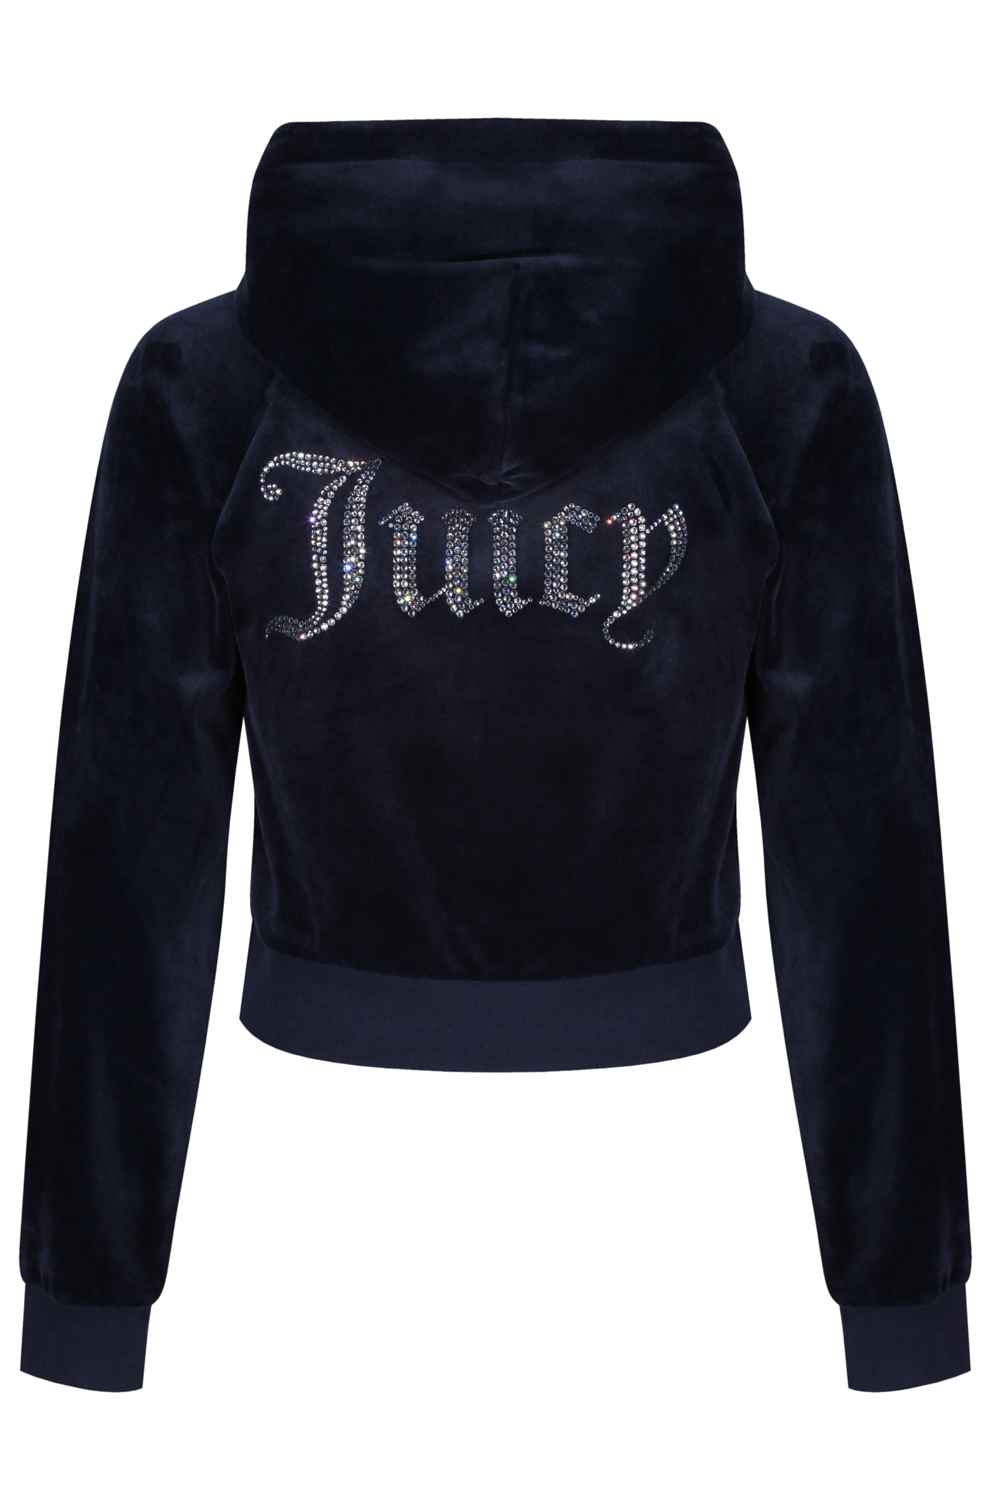 Juicy Couture Womens Sally Classic Velour Diamante Embellished Shrunken ...